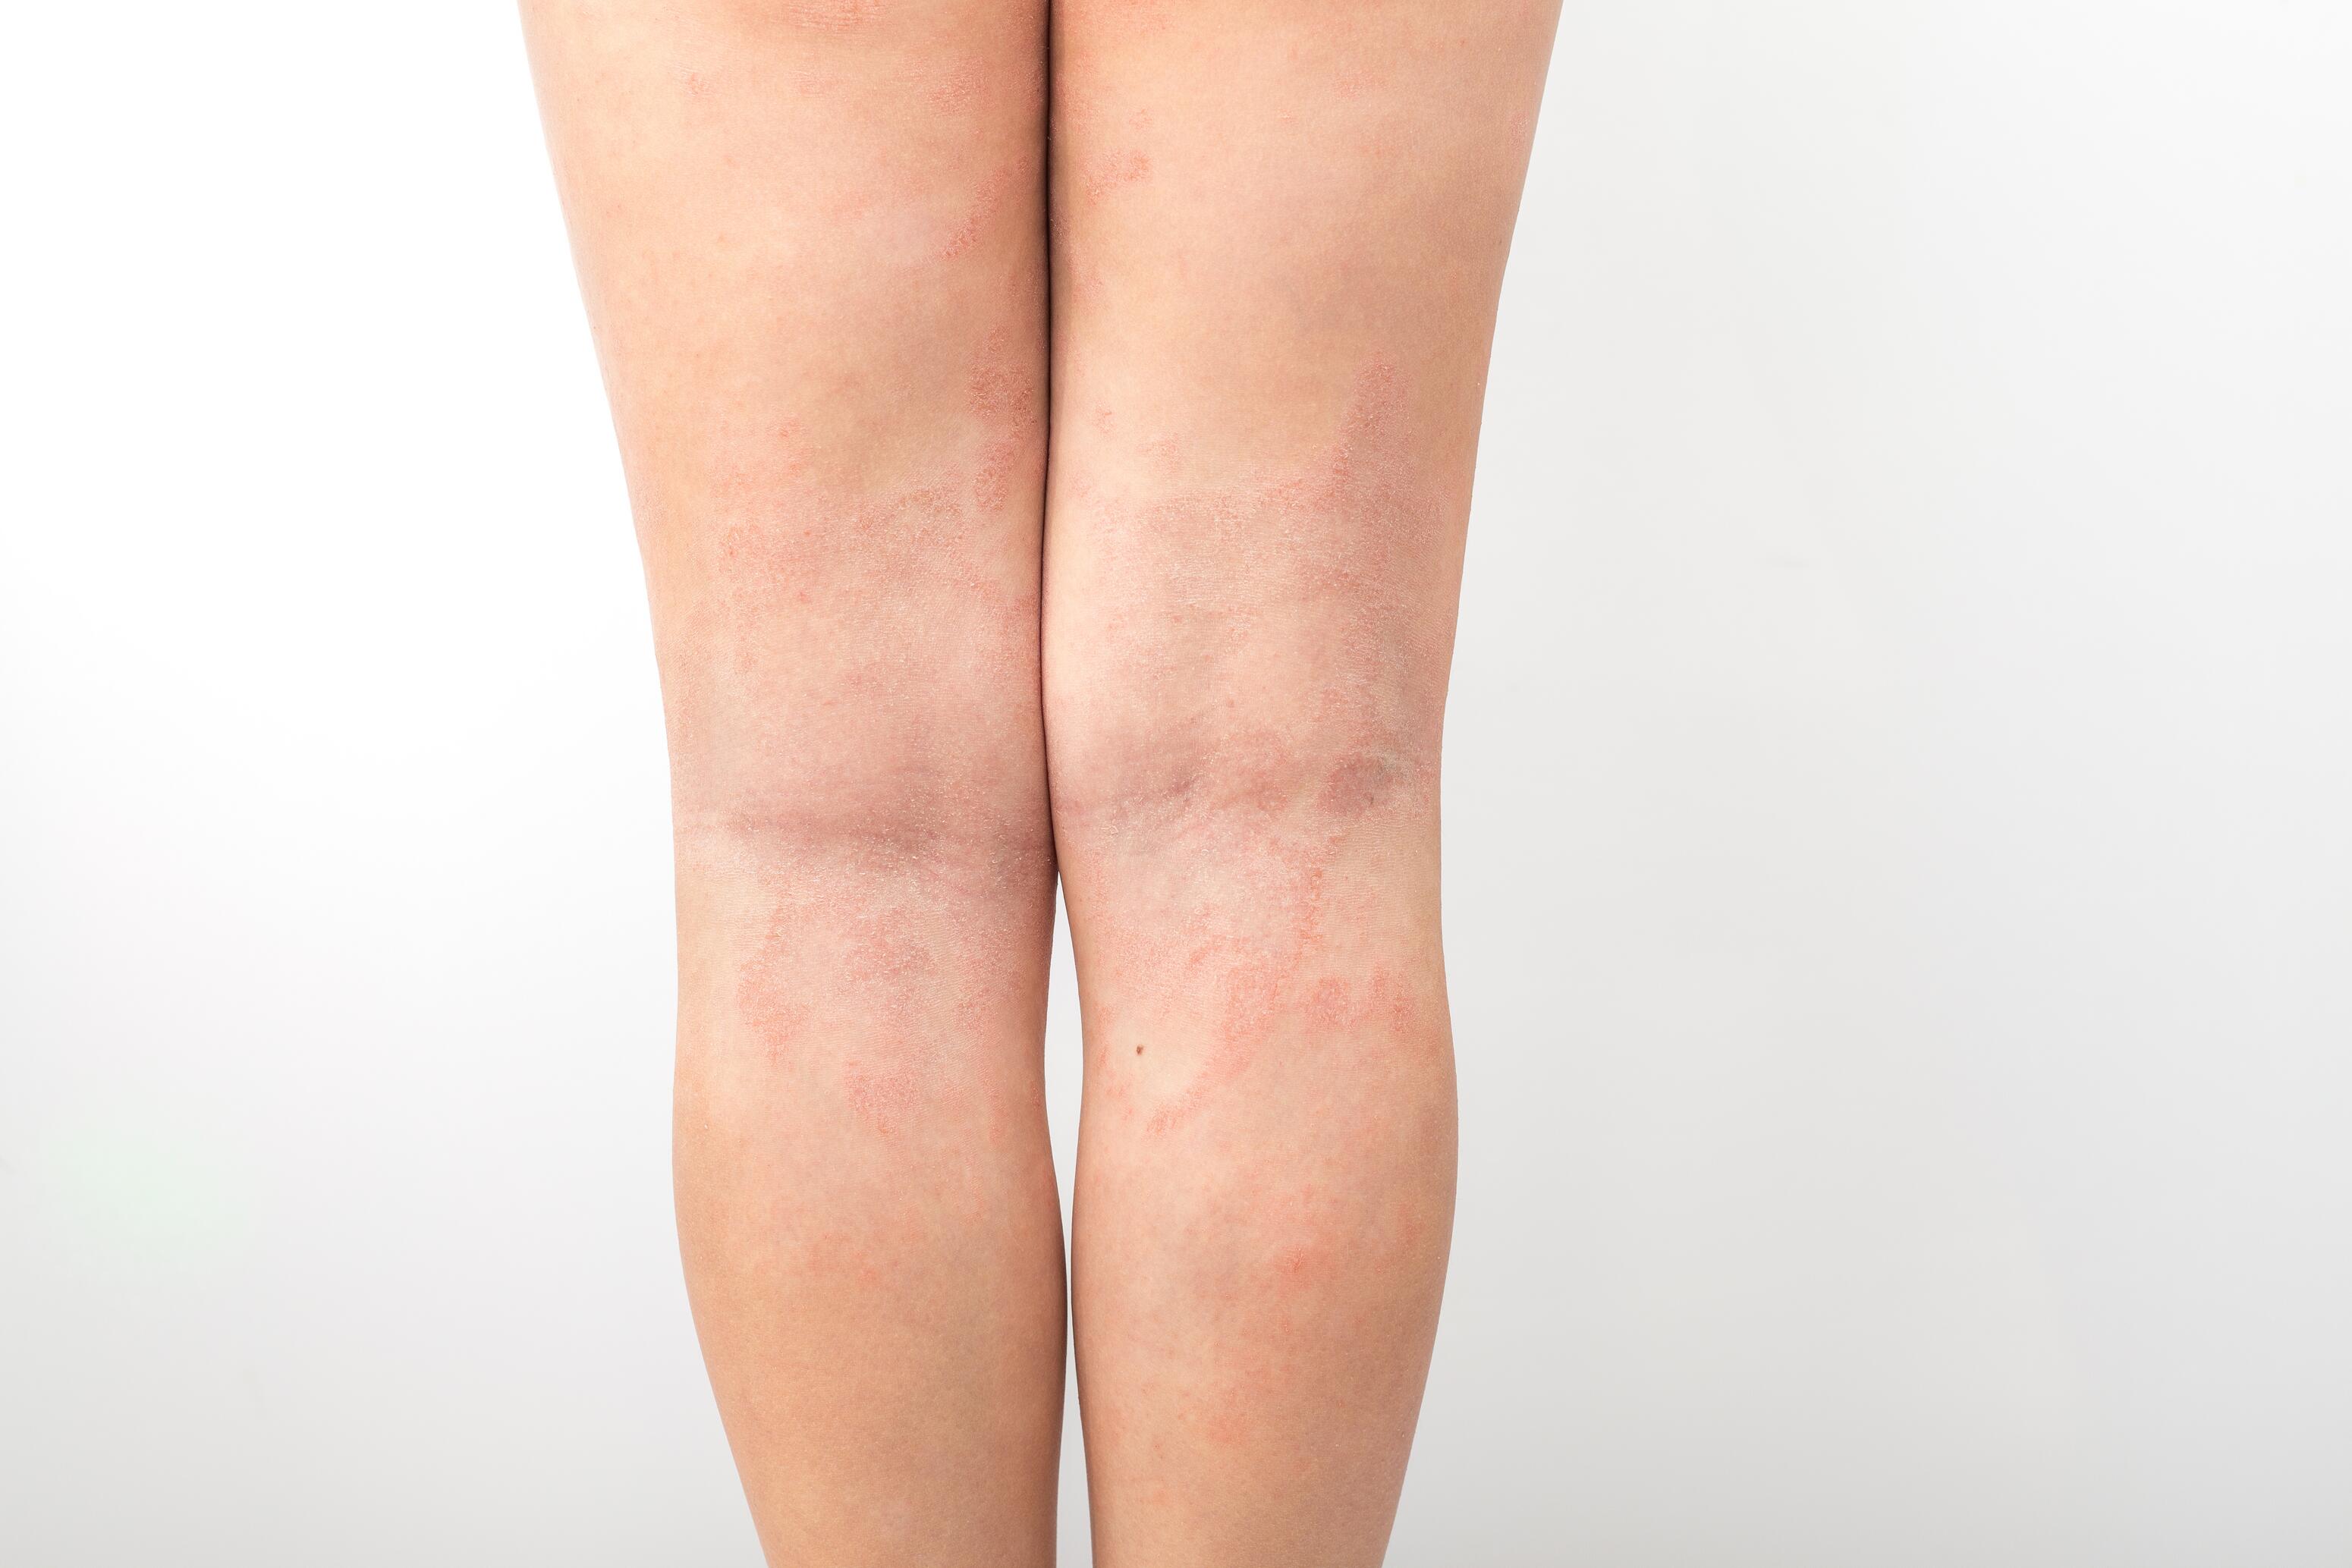 Child with eczema in the folds of the knees